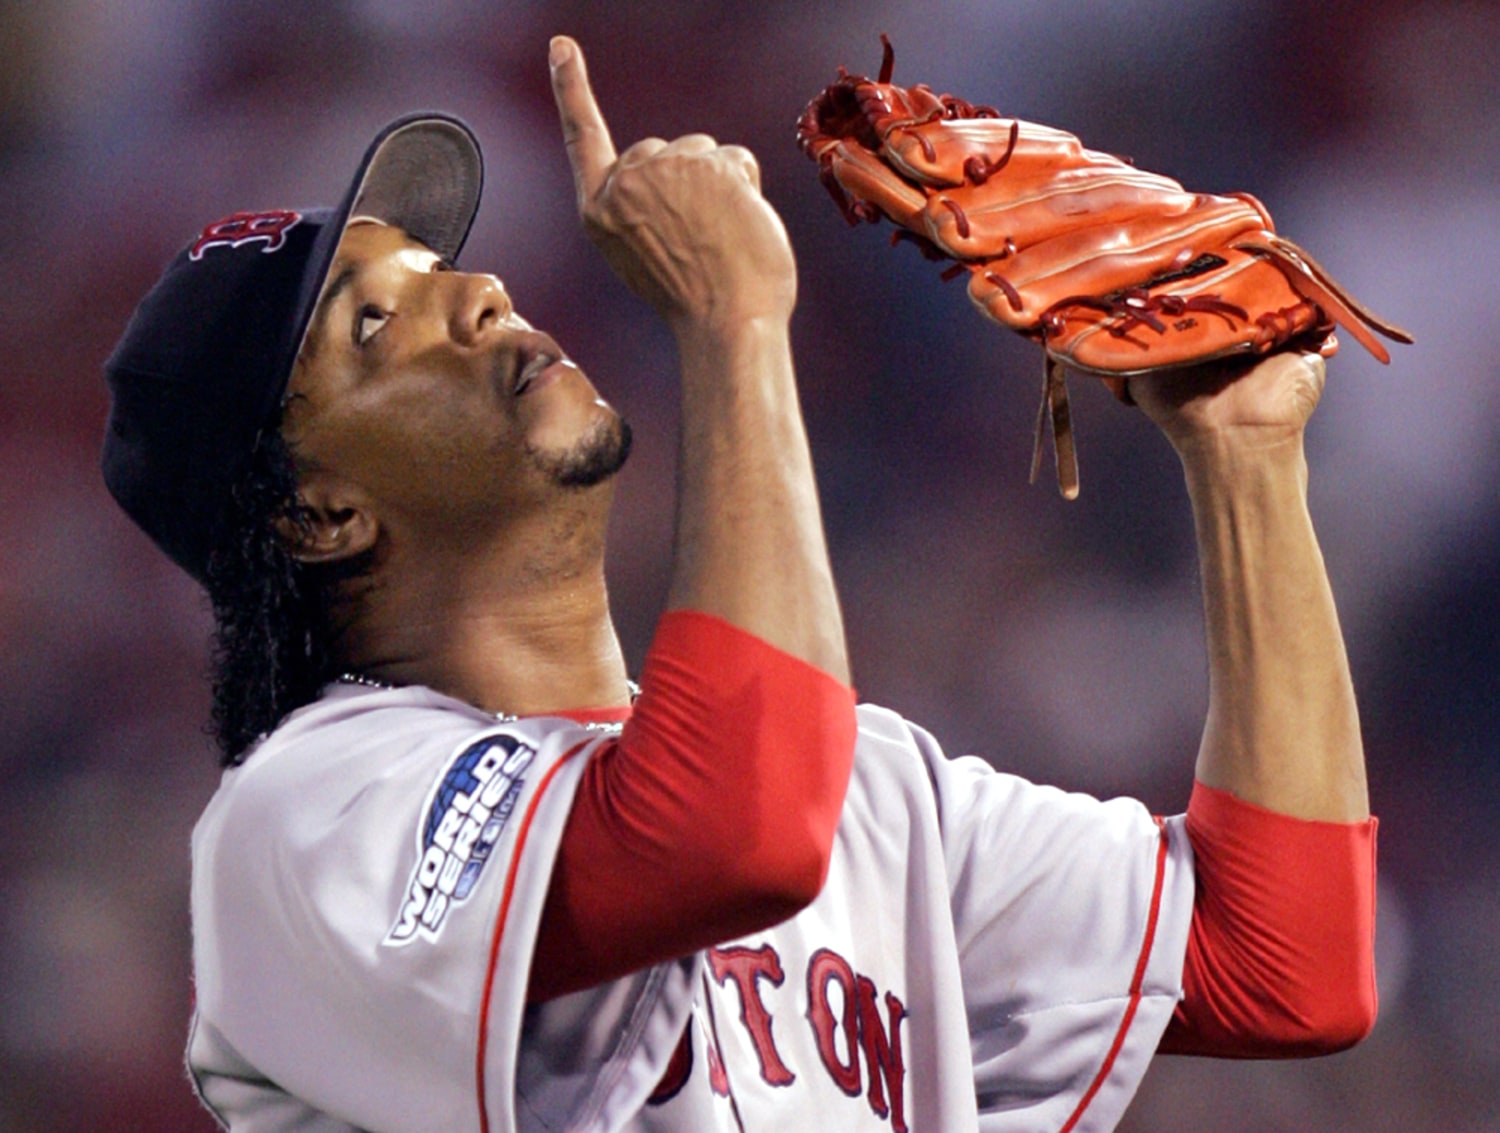 Best All-Star Game pitching performance EVER?! Pedro Martinez was